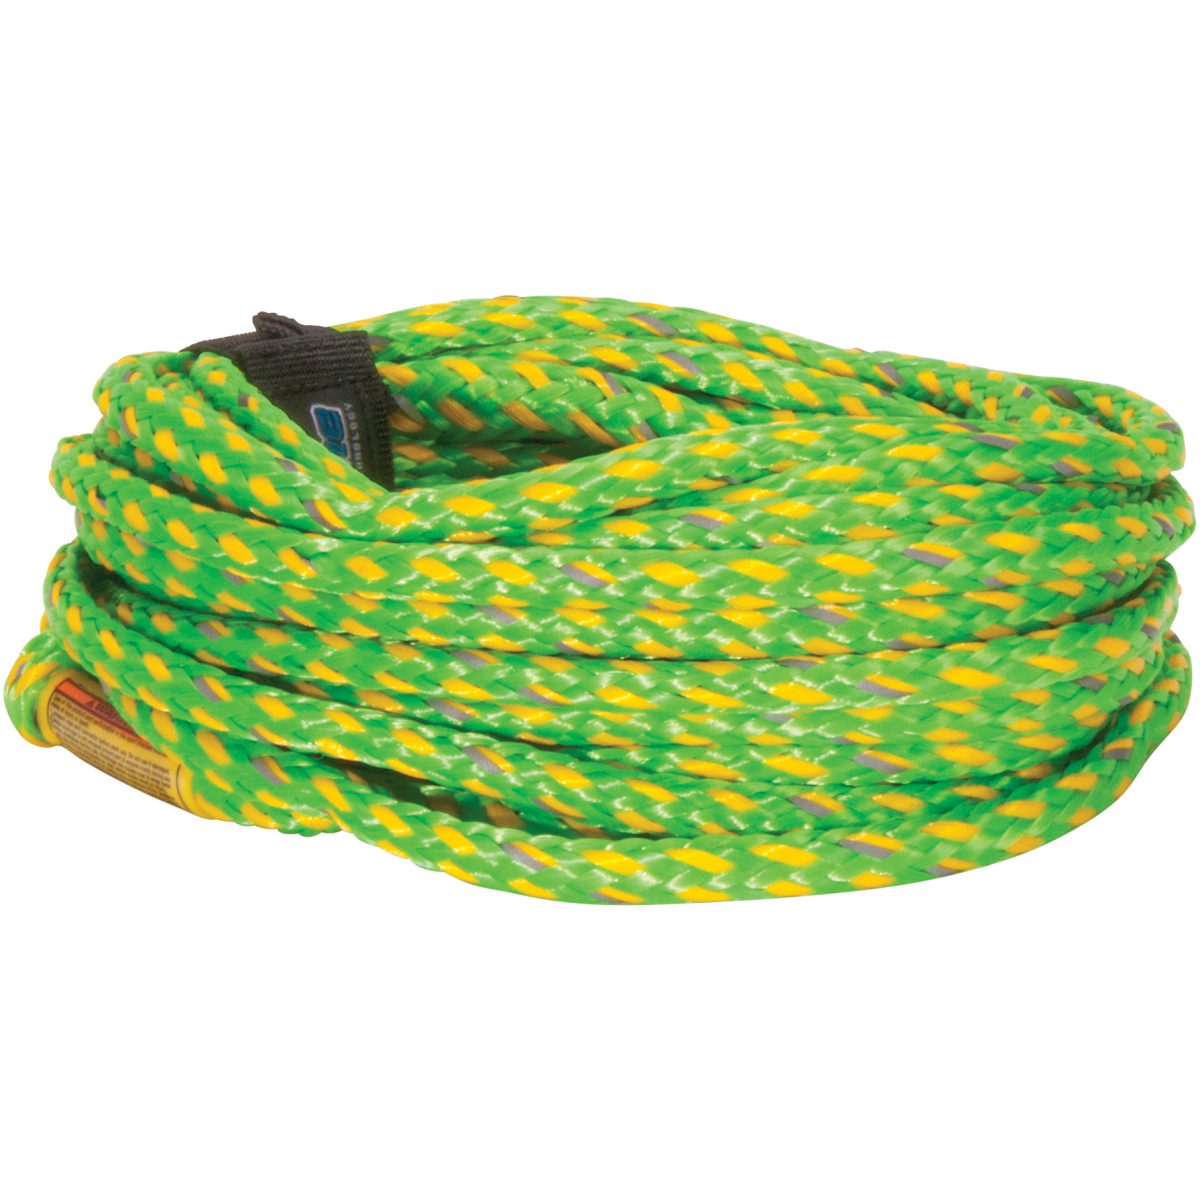 Connelly Proline 4-Person Safety Tube Rope - Green